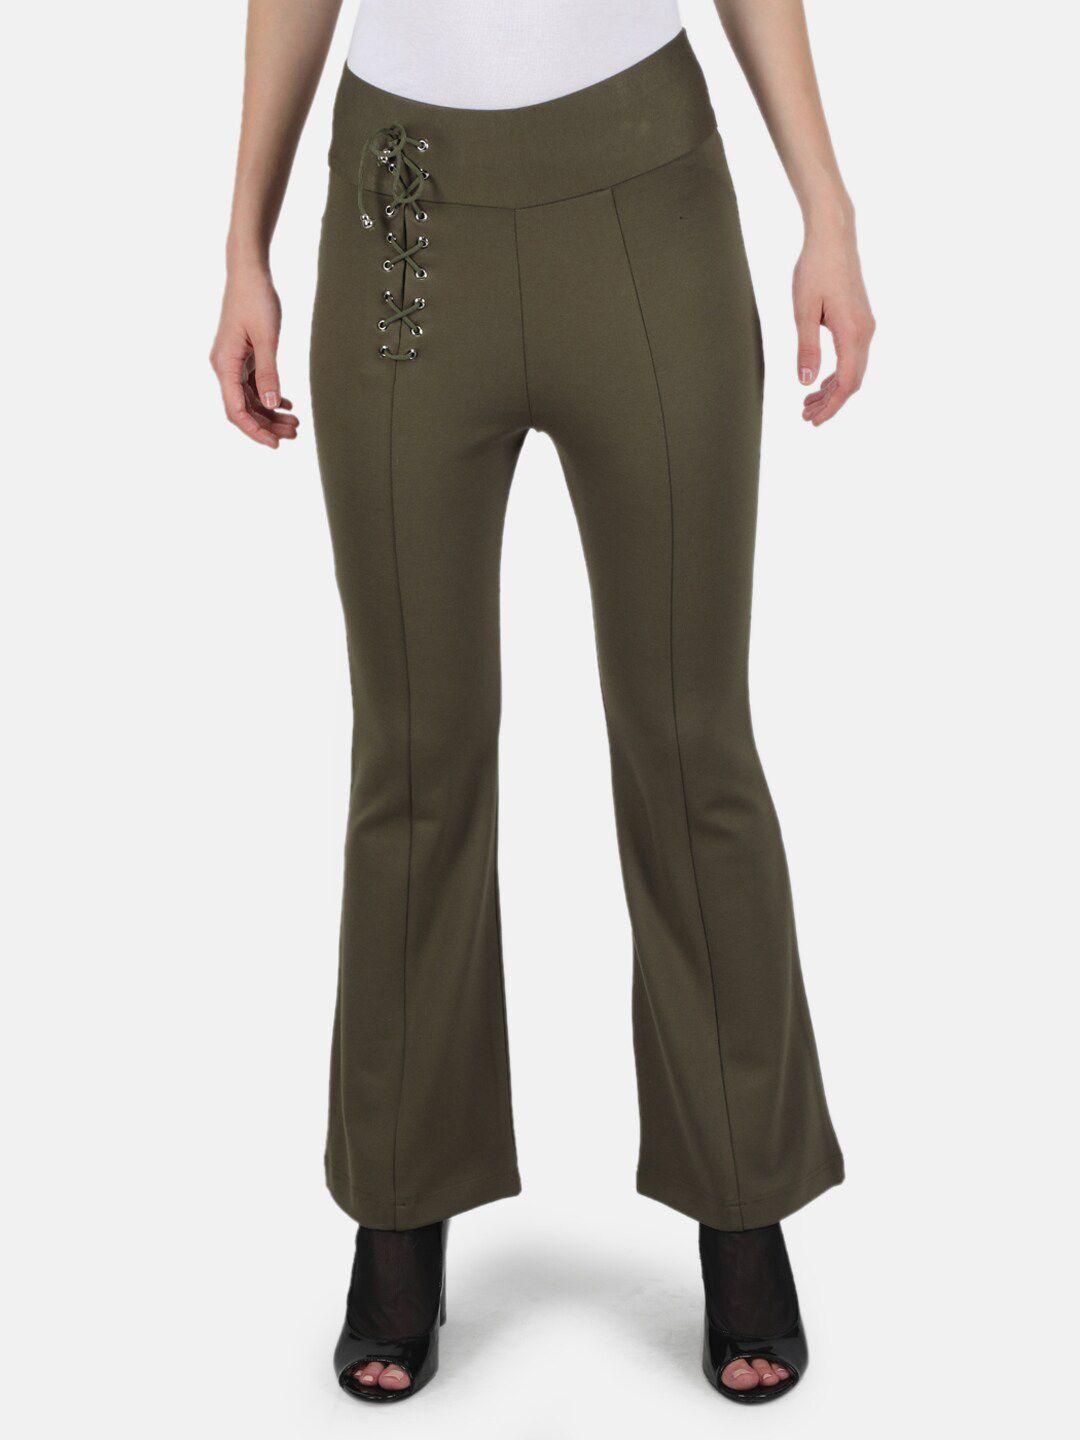 monte carlo women olive green solid jeggings